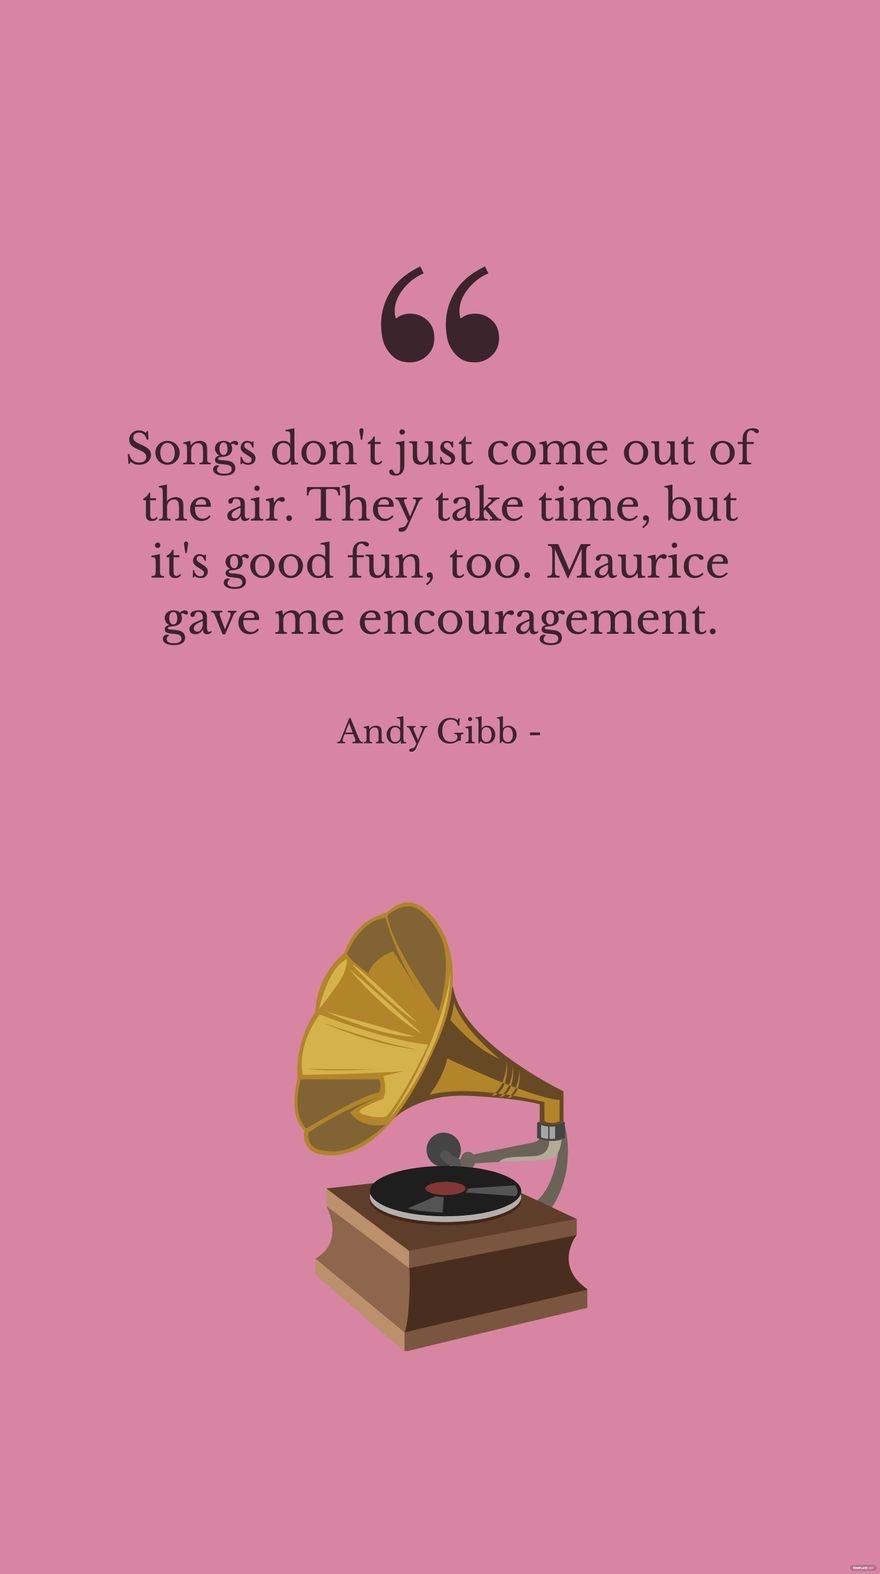 Andy Gibb - Songs don't just come out of the air. They take time, but it's good fun, too. Maurice gave me encouragement. Template